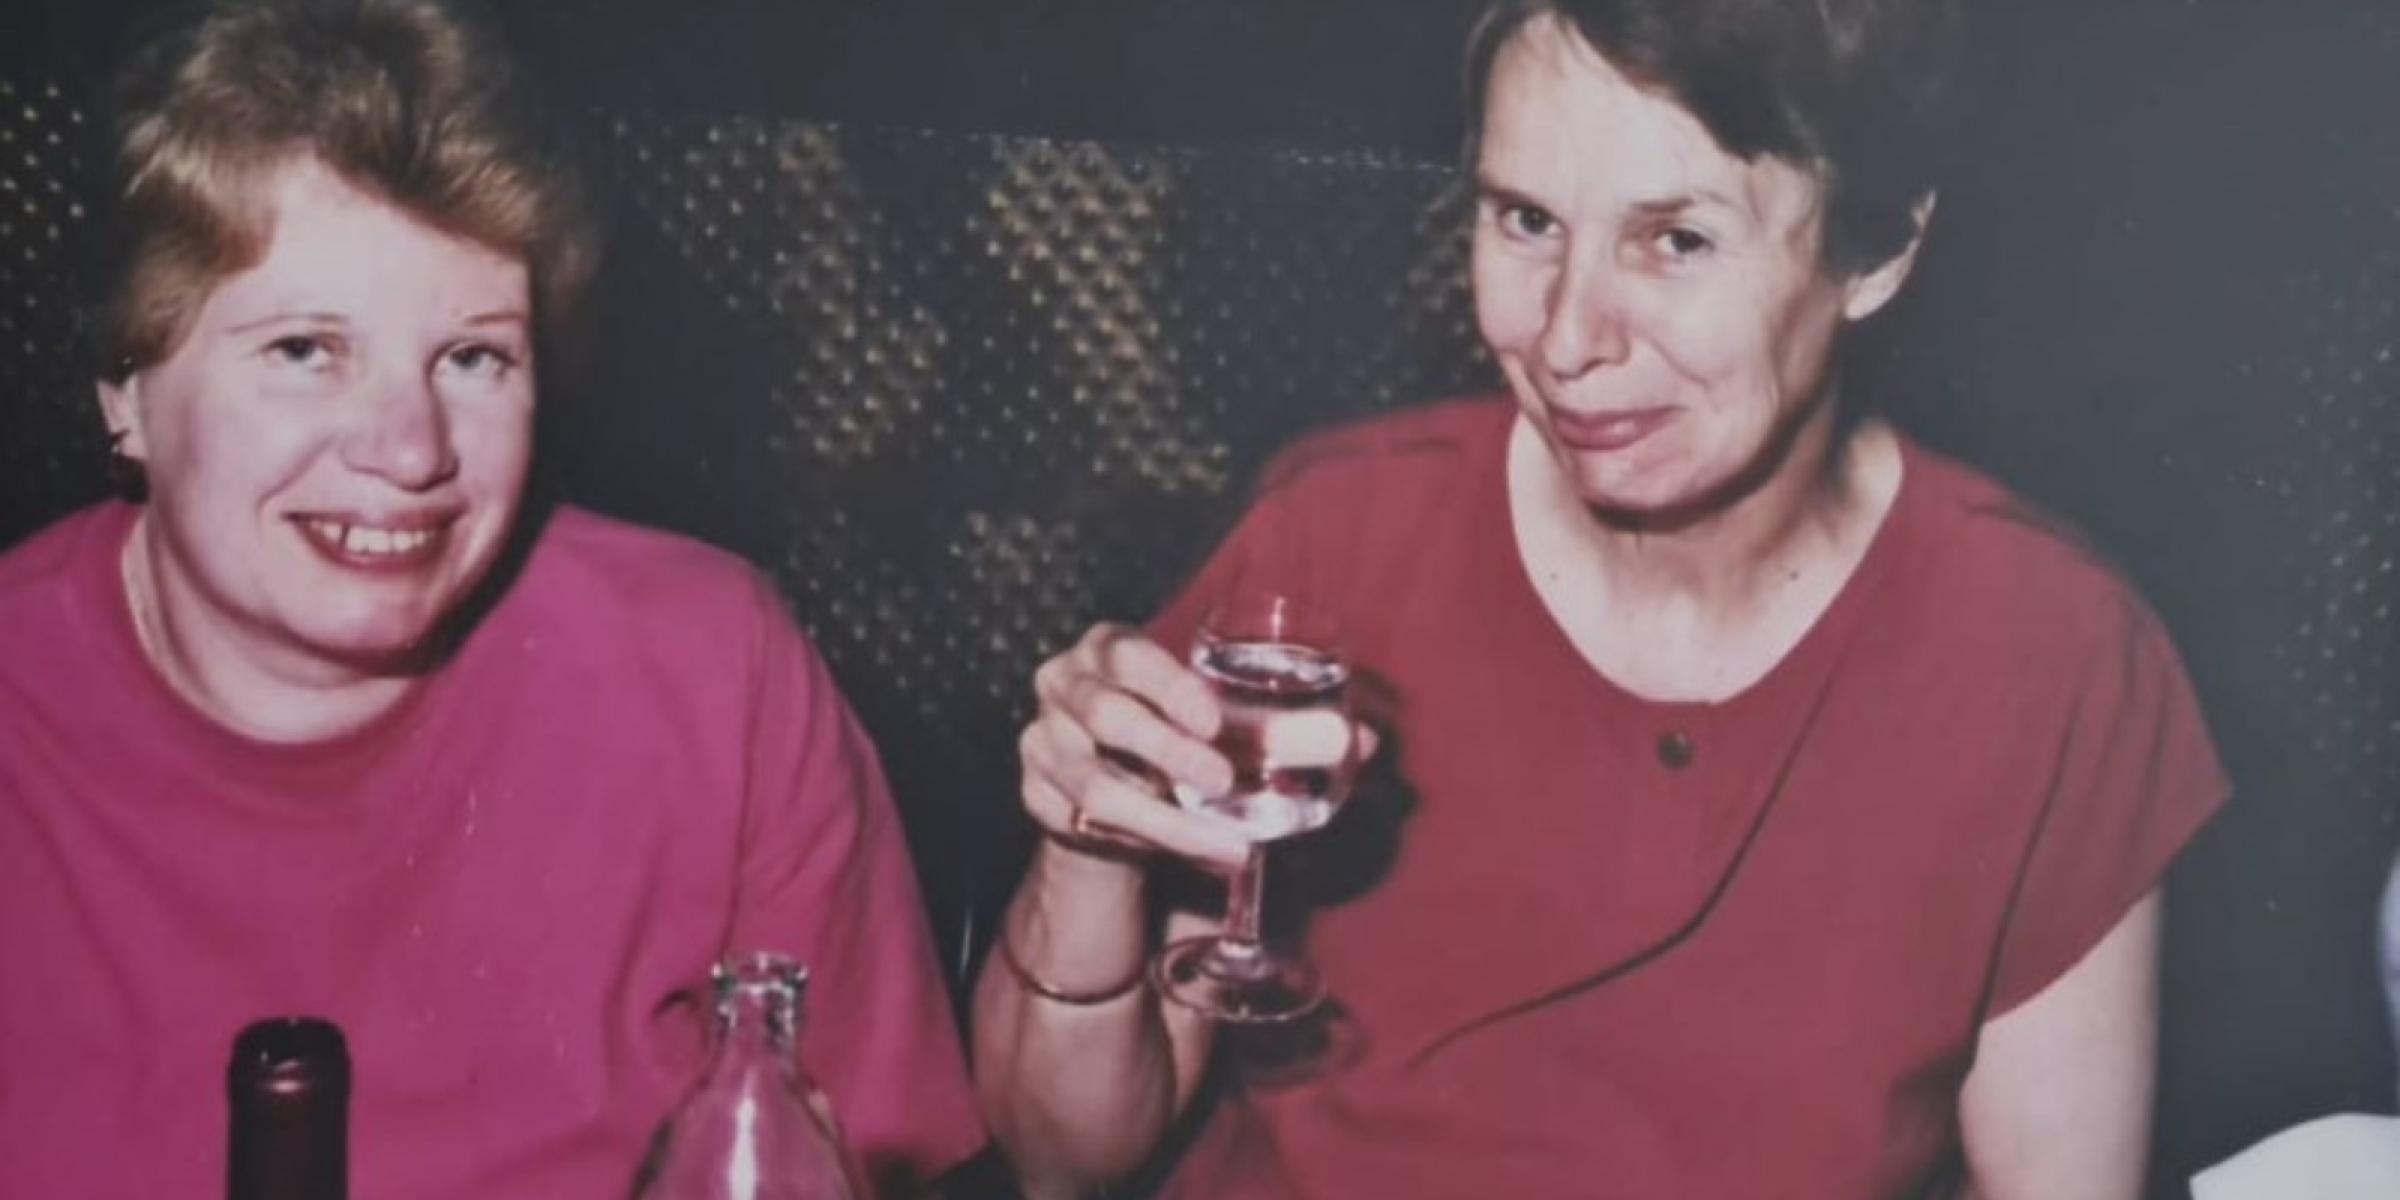 A picture of a photograph with Brenda and Jo smiling, holding a glass of wine